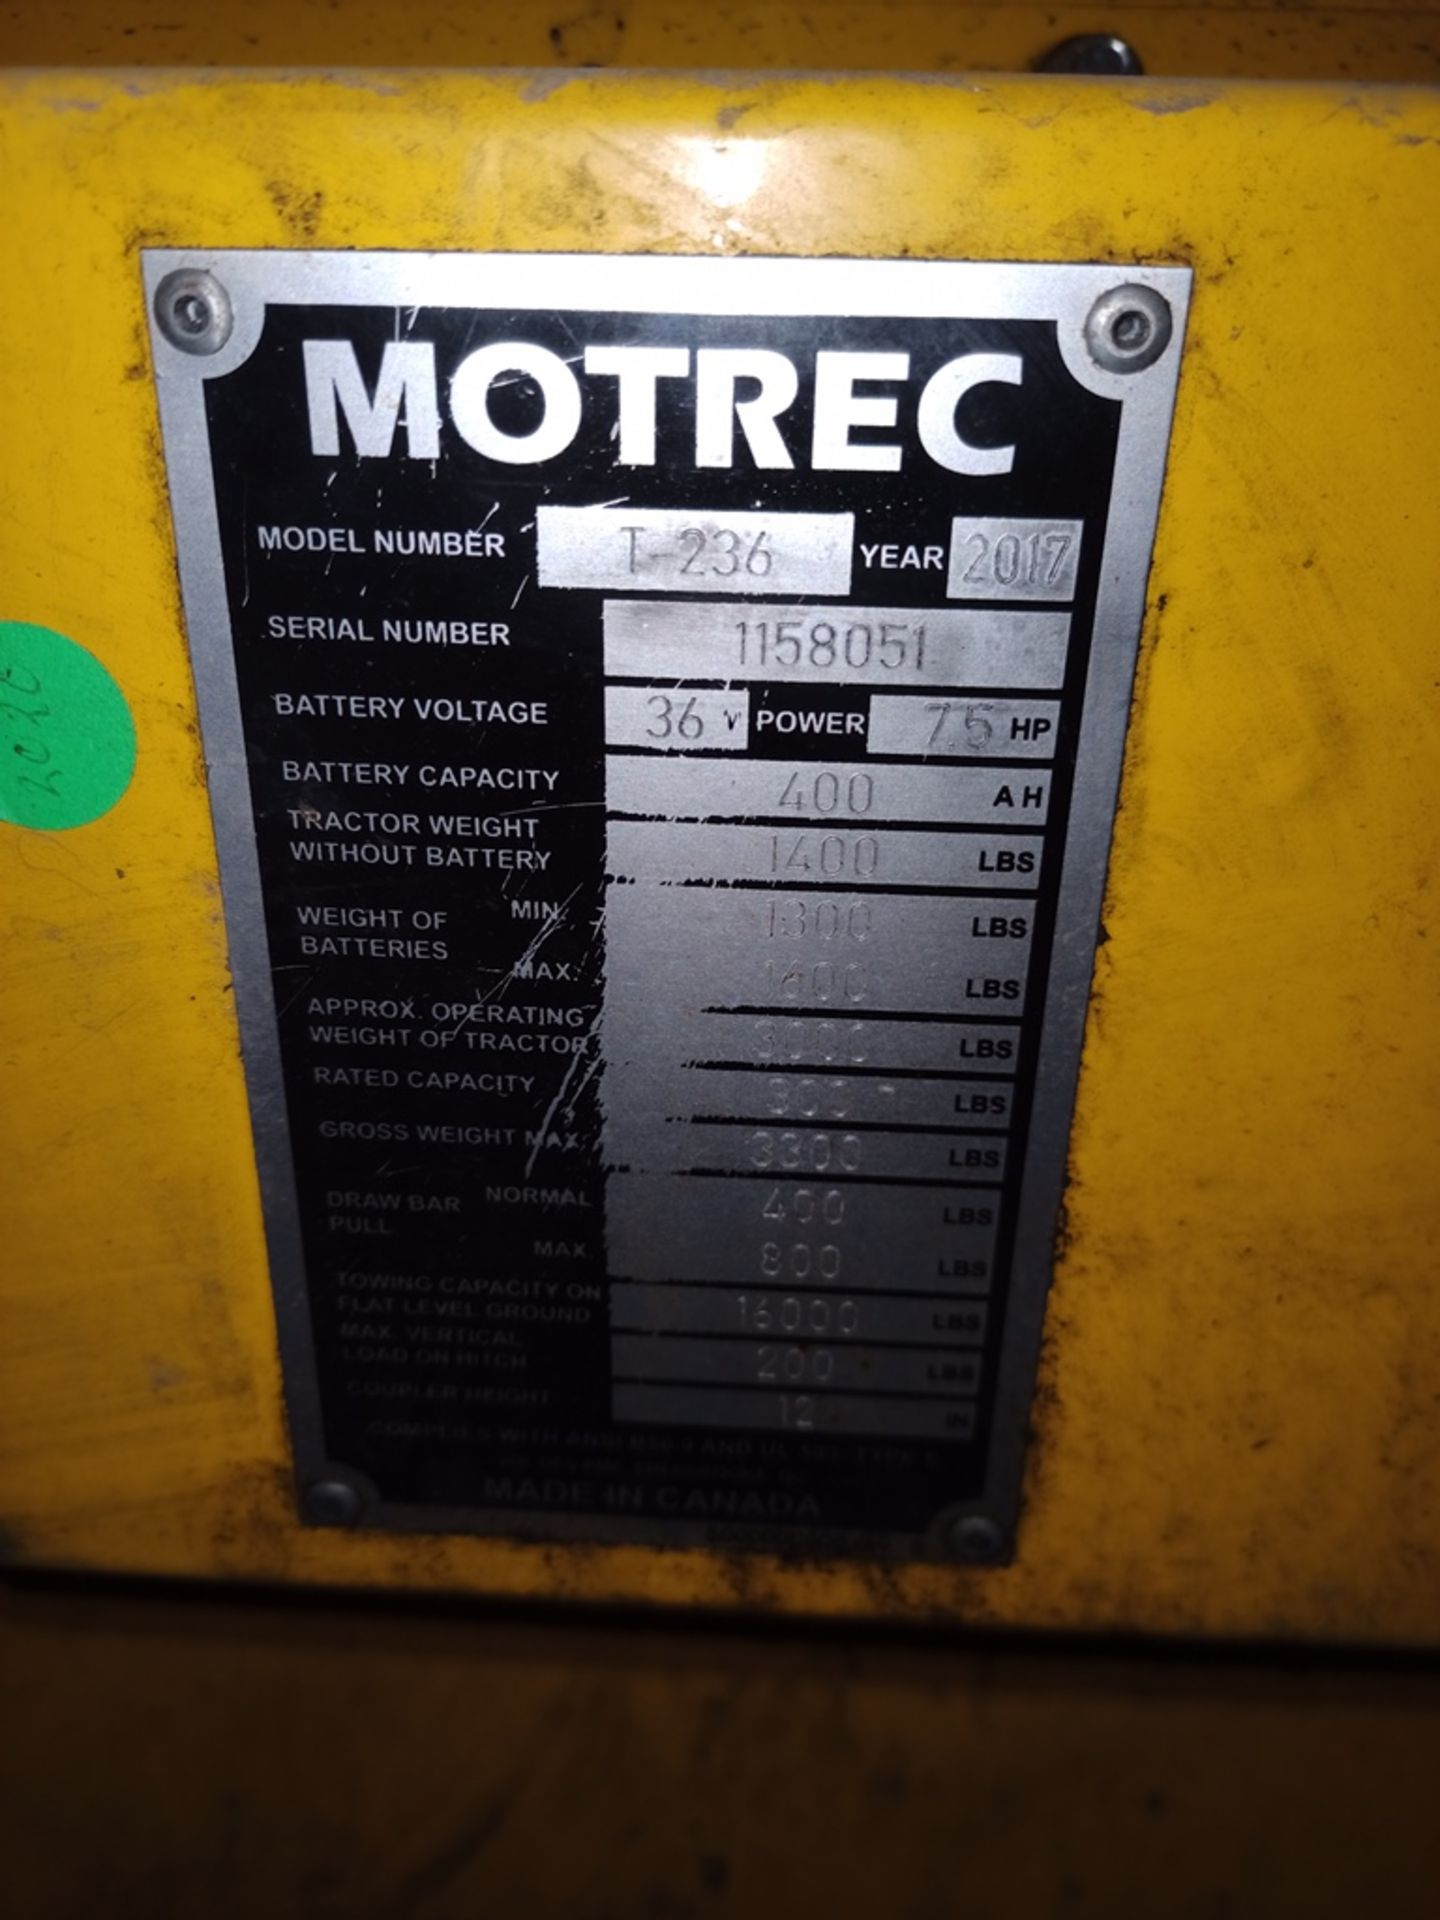 Motrec electric Tow tractor, Model MT-236, S/N 1158051, Year 2017 - Image 21 of 24